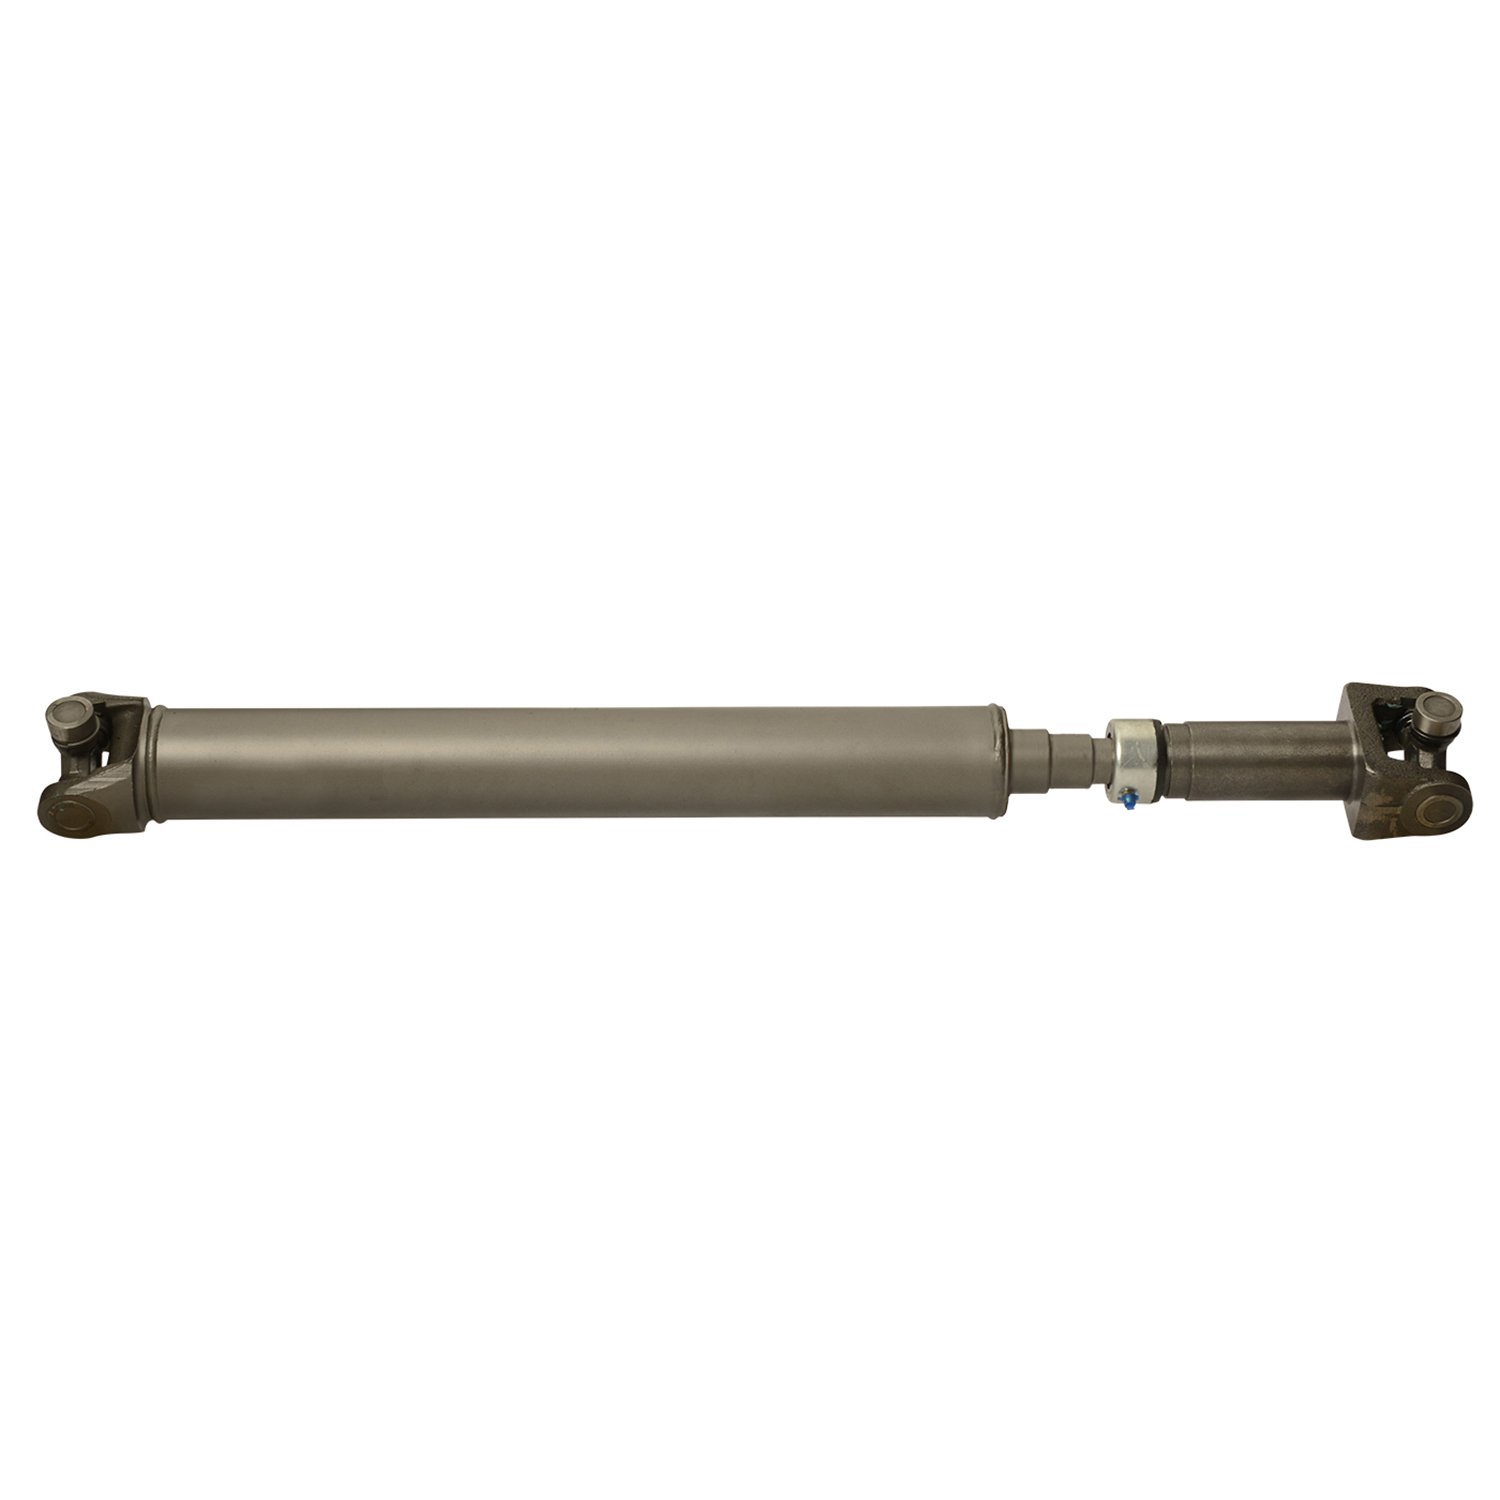 USA Standard ZDS9360 Front Driveshaft, For GM Truck & Suv Pickup, 32.5 in. Center-To-Center